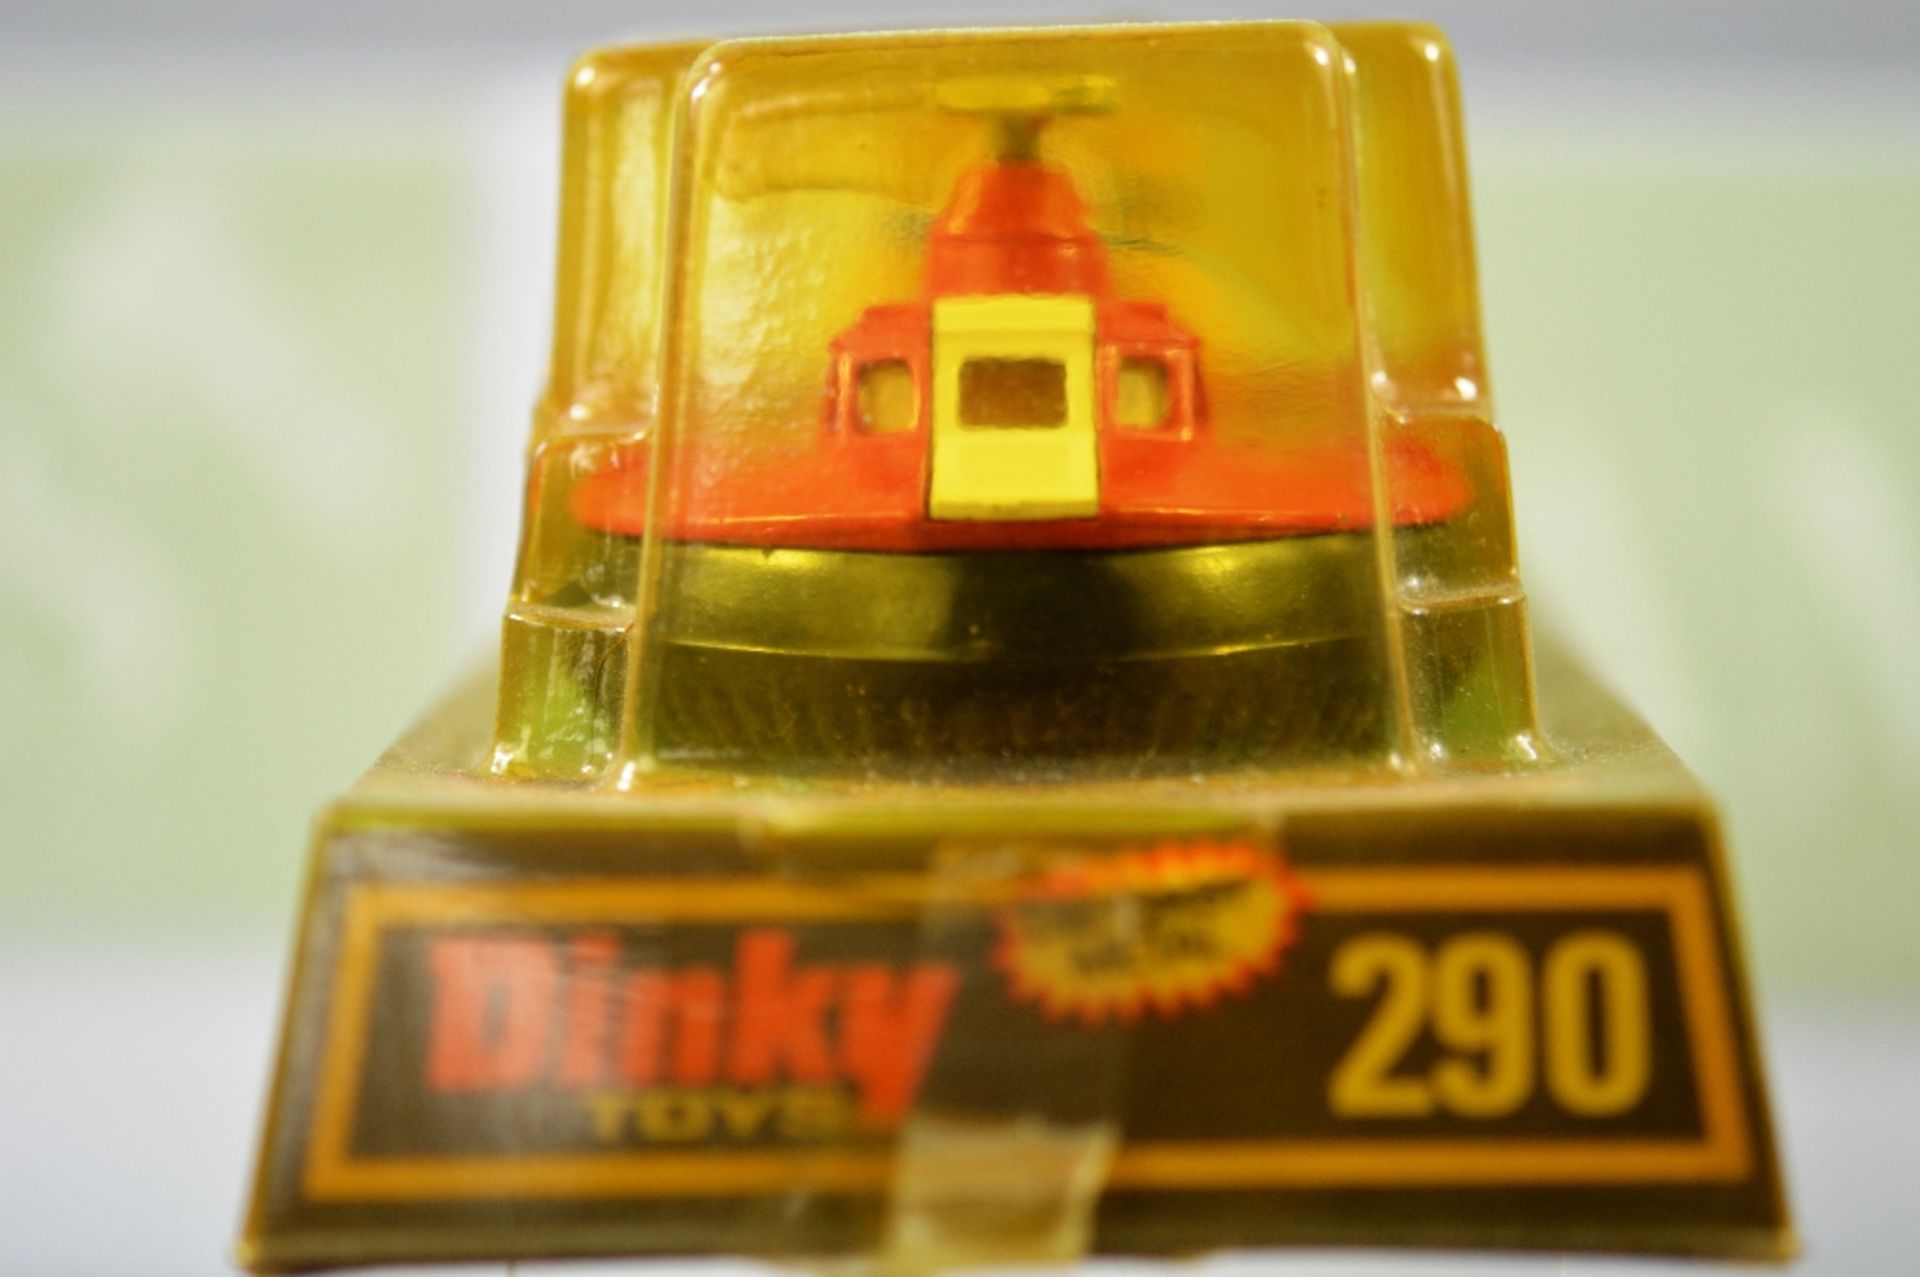 Dinky Toys 290 SRN 6 Hovercraft  in original packaging from private collector for 30 years - Image 3 of 3